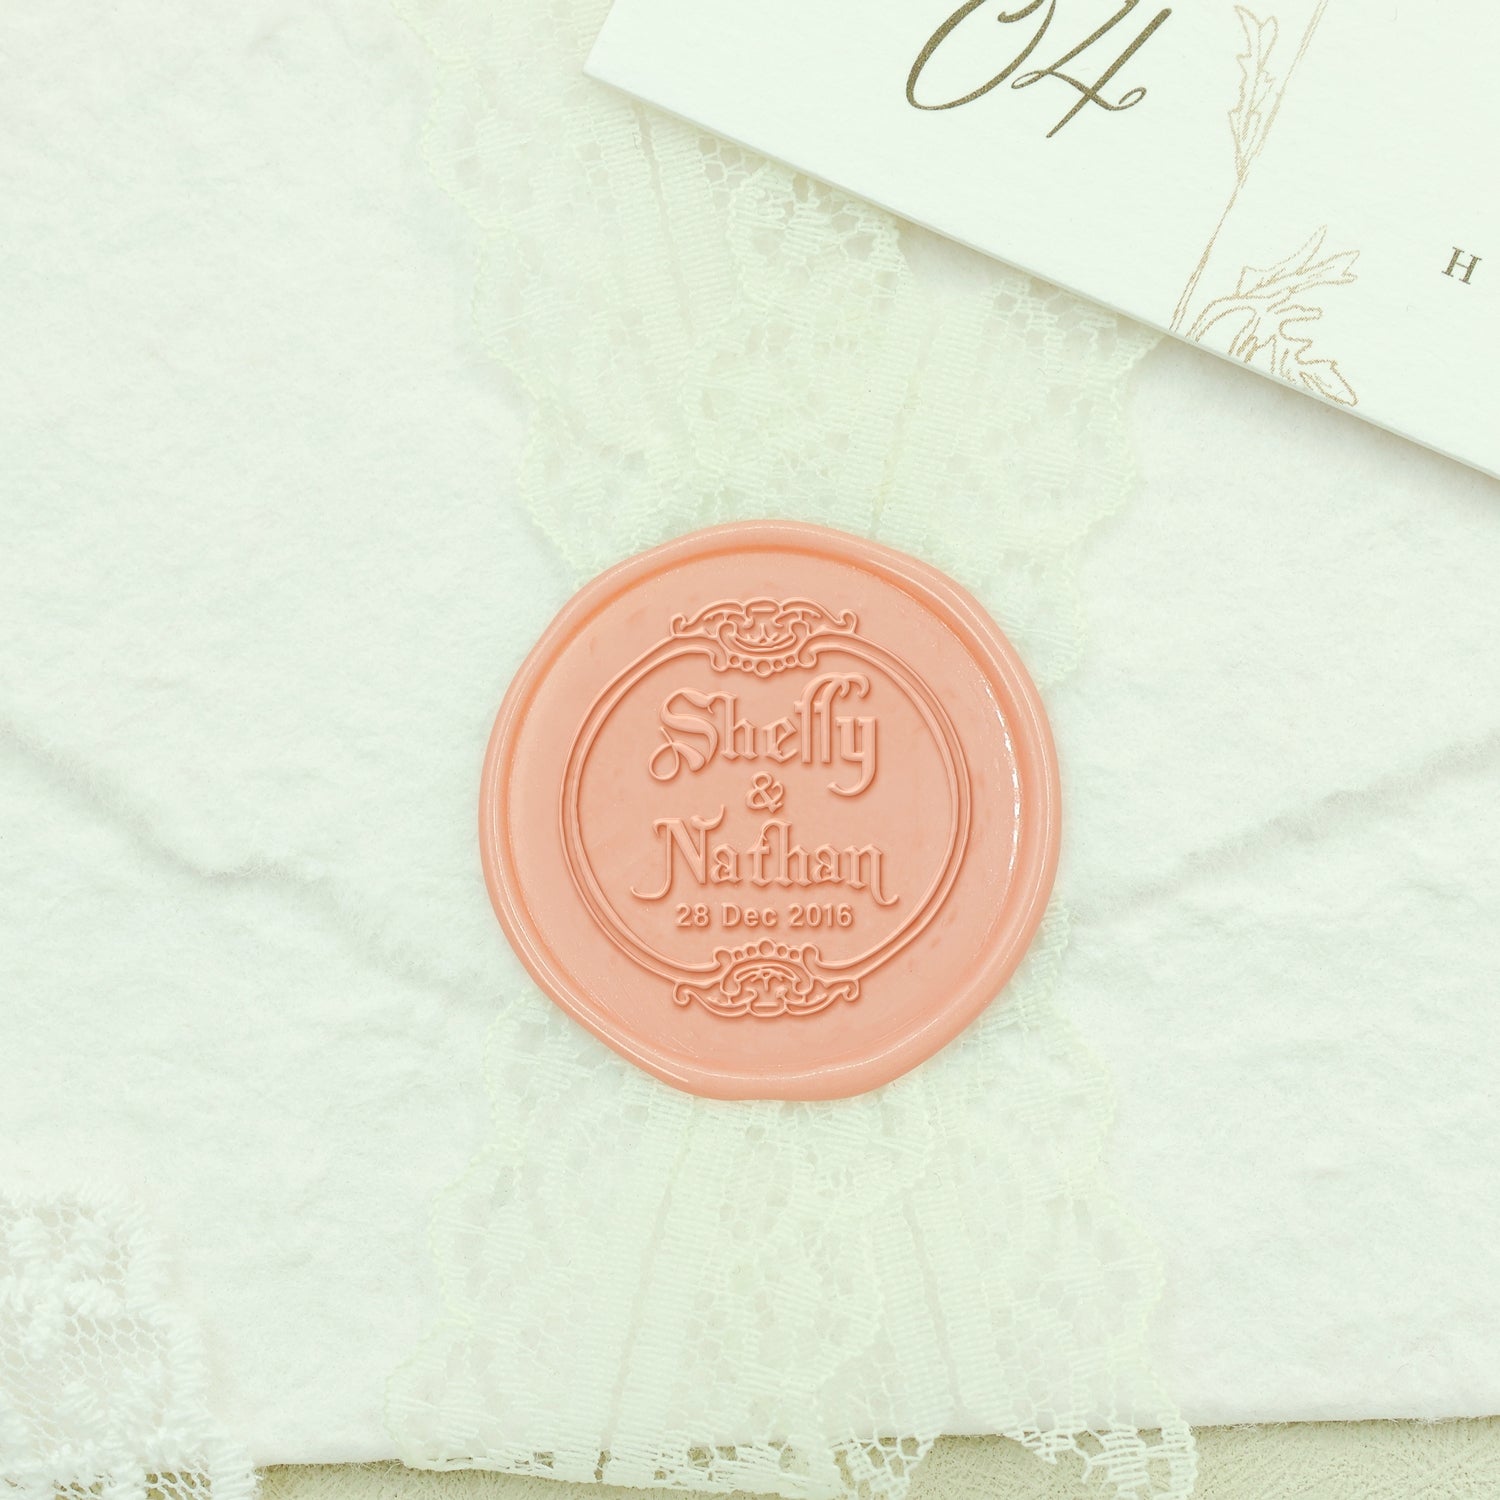 December 2016 Date Stamps + Card Template